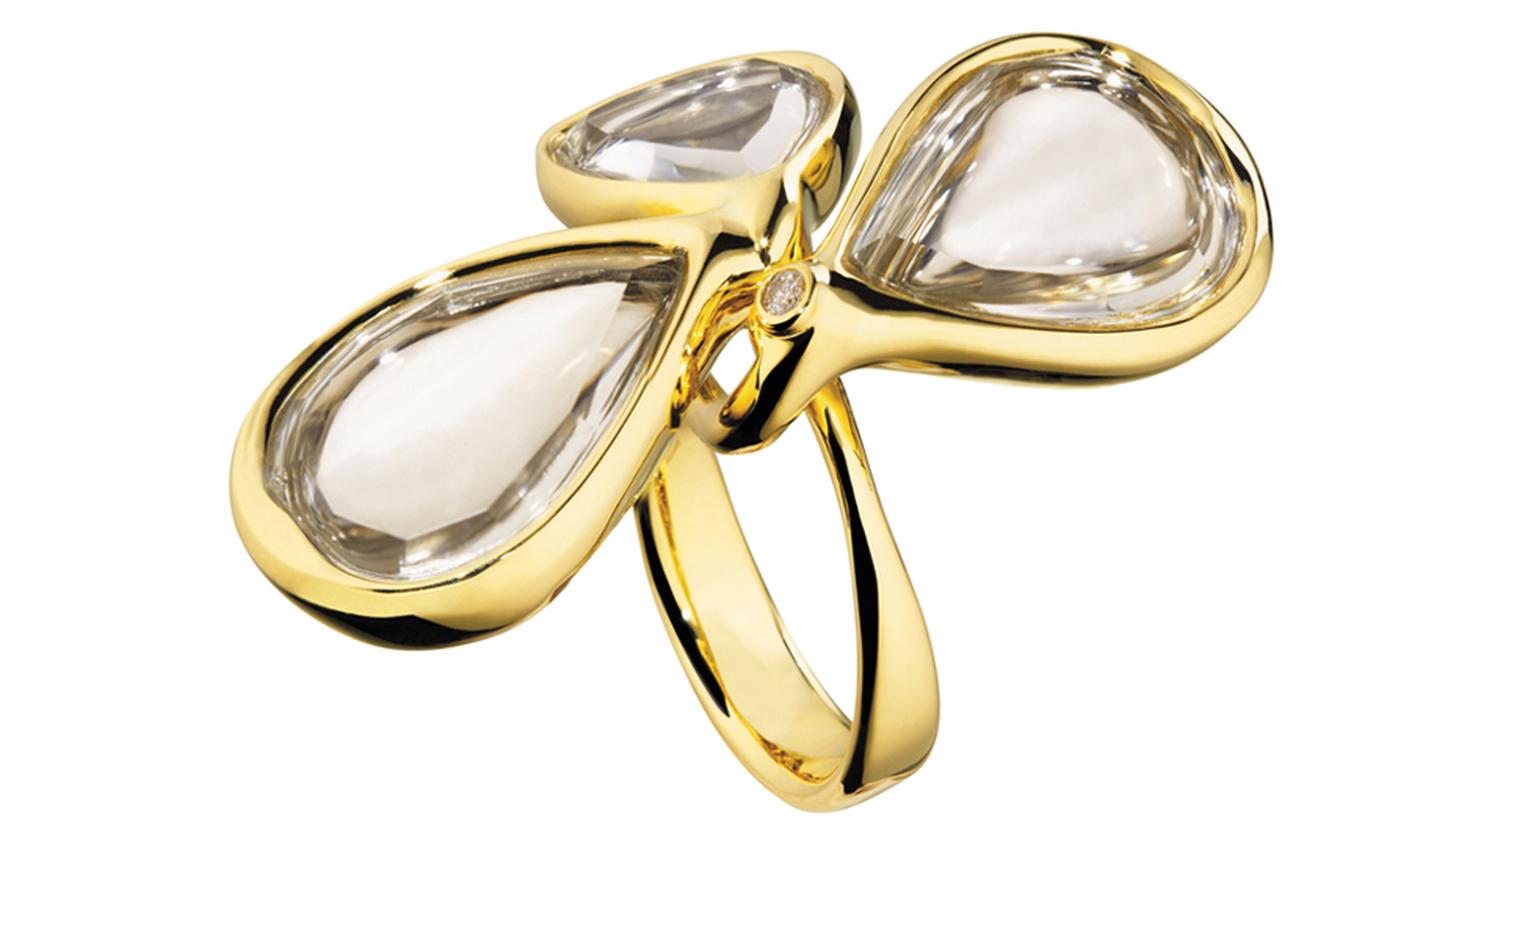 Diane von Furstenberg by H Stern. Sutras bold Ring in yellow gold, rock crytal and a diamond. Price from £5,500